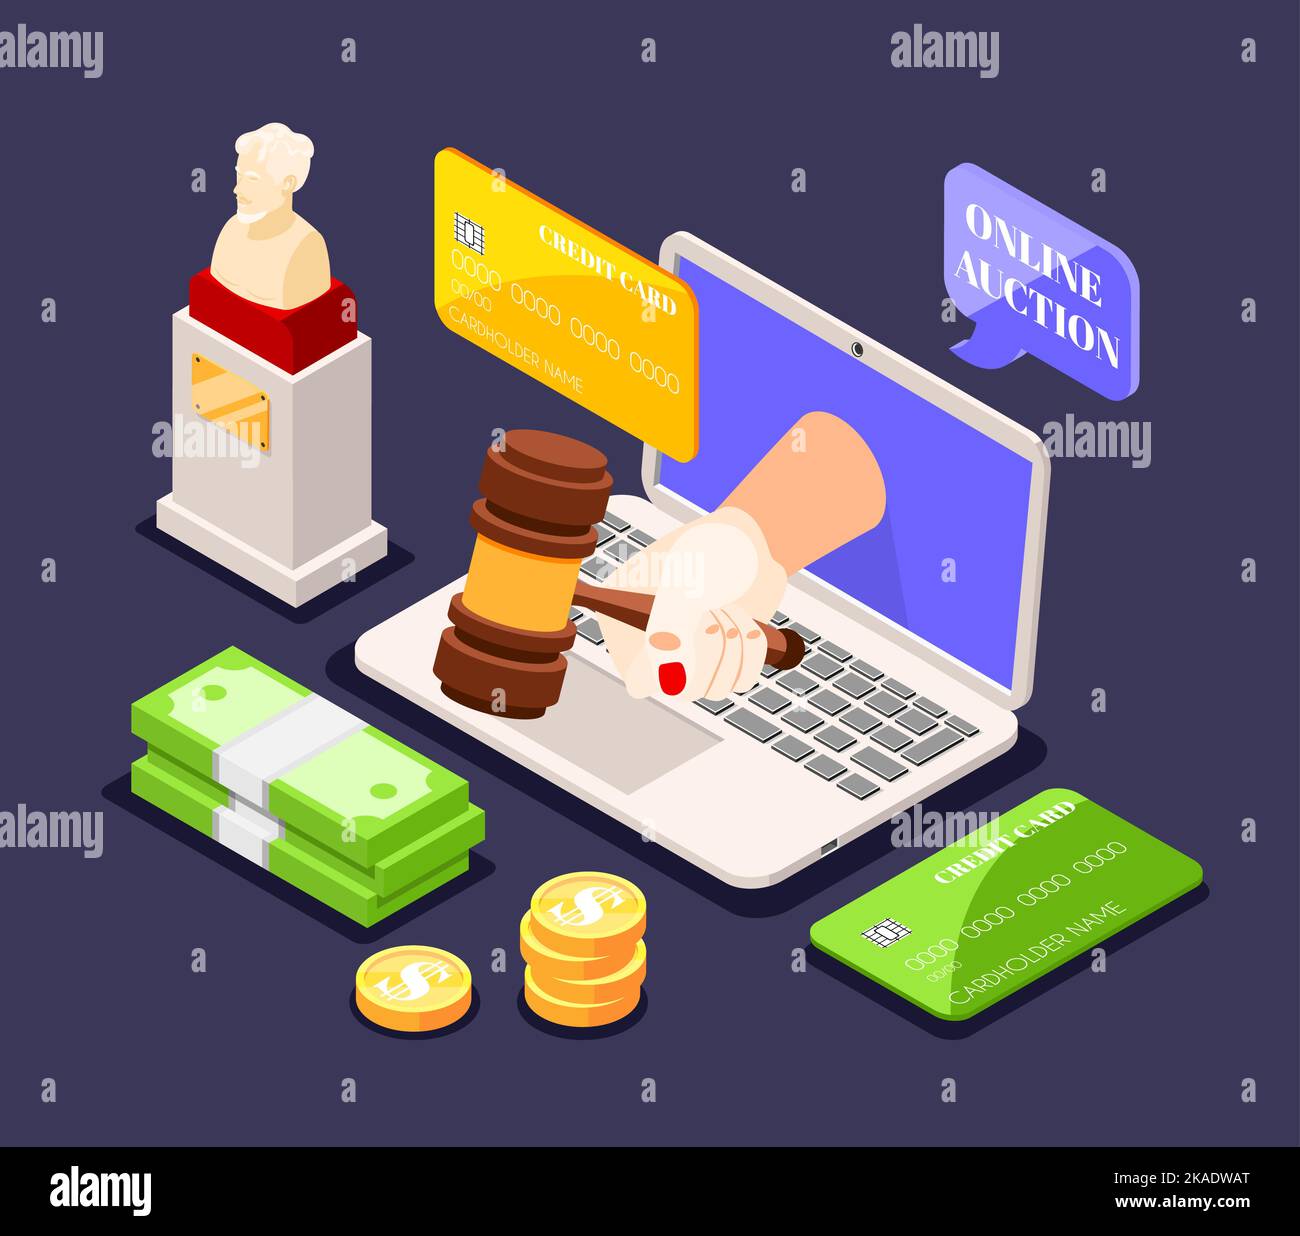 Auction isometric background composition with laptop and human hand holding gavel with cash and credit card vector illustration Stock Vector